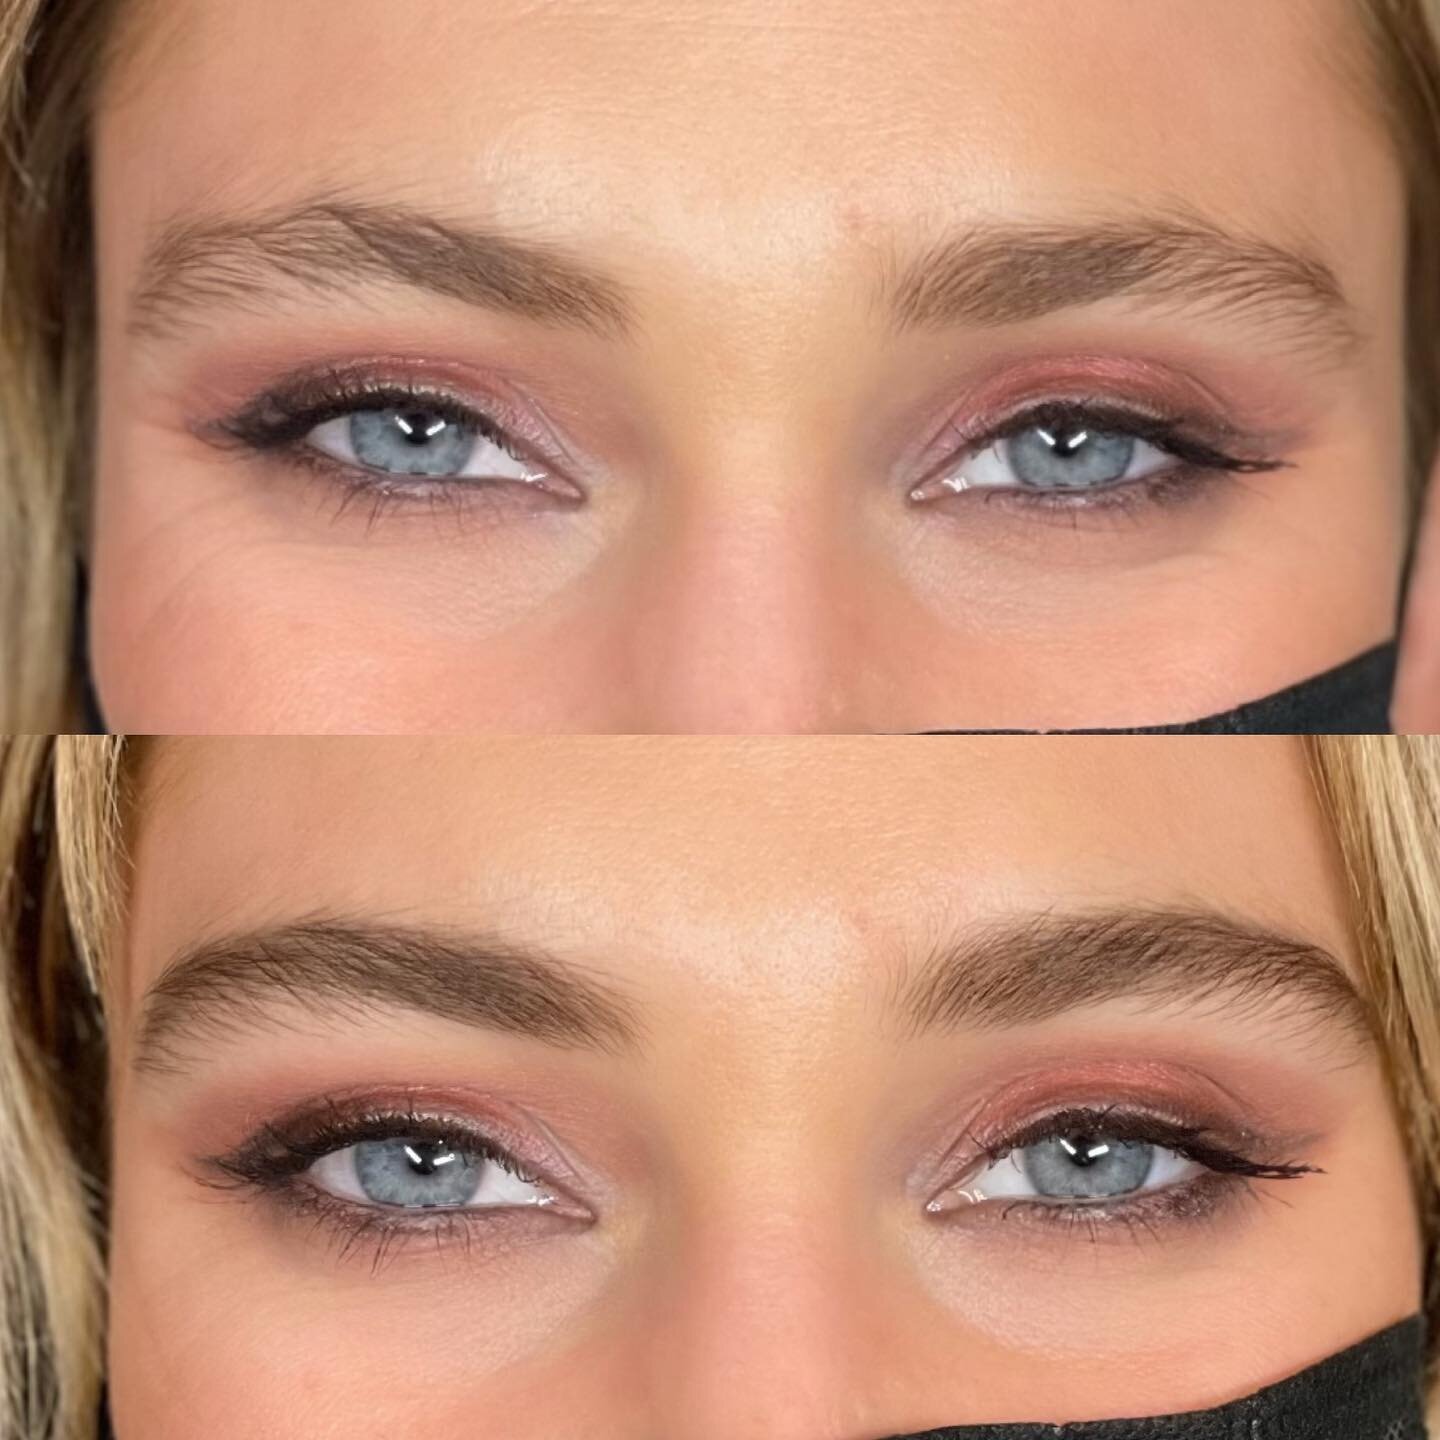 Coming for you NYC! Who is ready for their very best brows? Gorgeous Sam had a Brow Enlightenment to get her most full, flattering eyebrows with a brow-lift effect to boot. They even make these stunning eyes pop more than they already do✨
Appointment